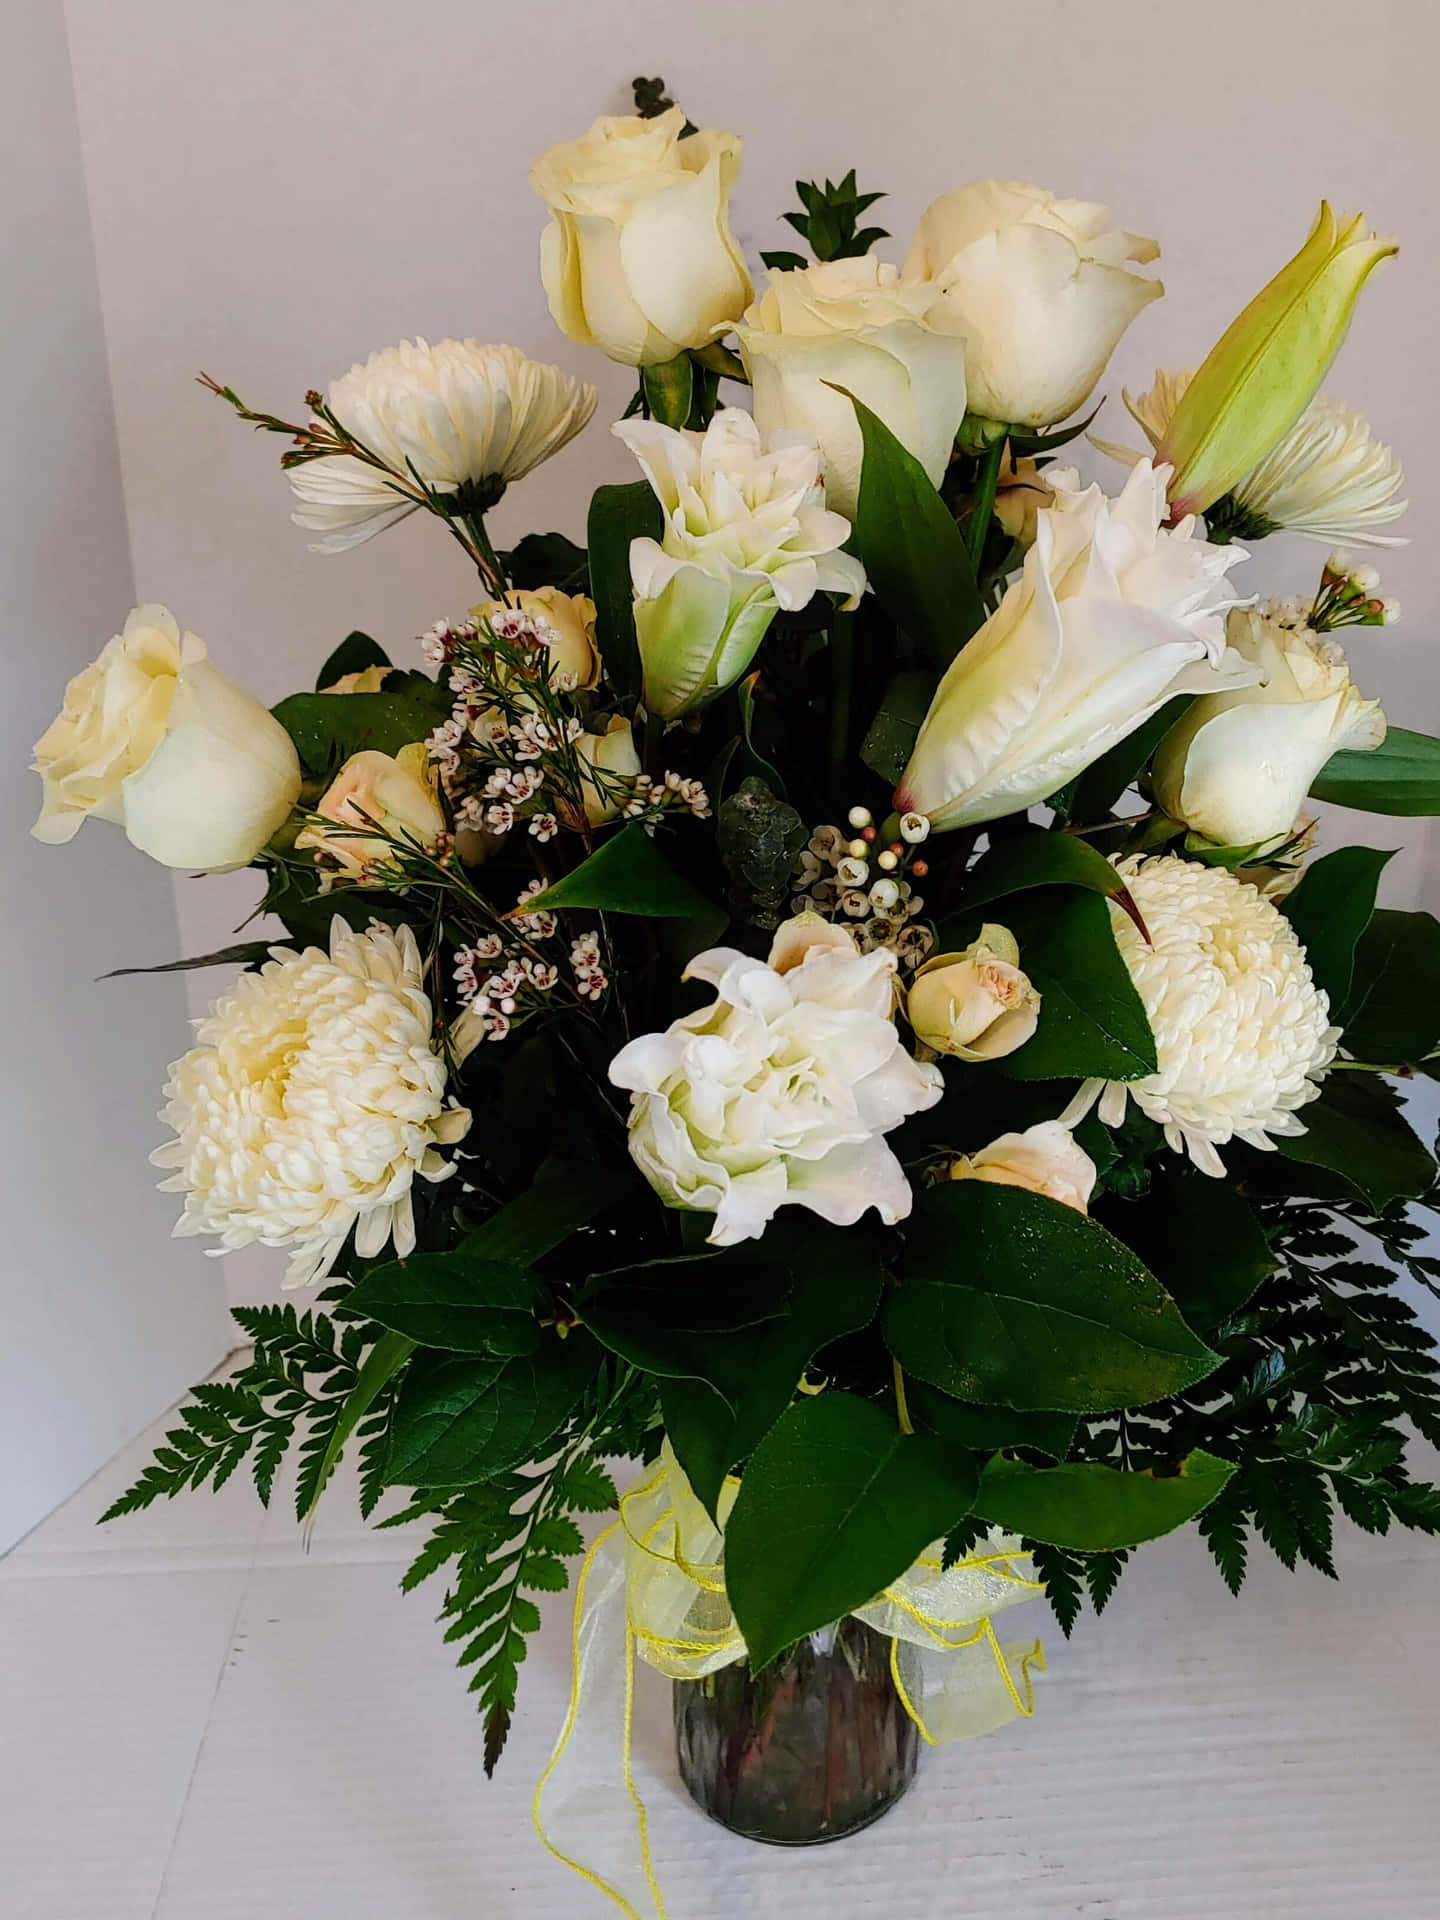 A Vase With White Flowers